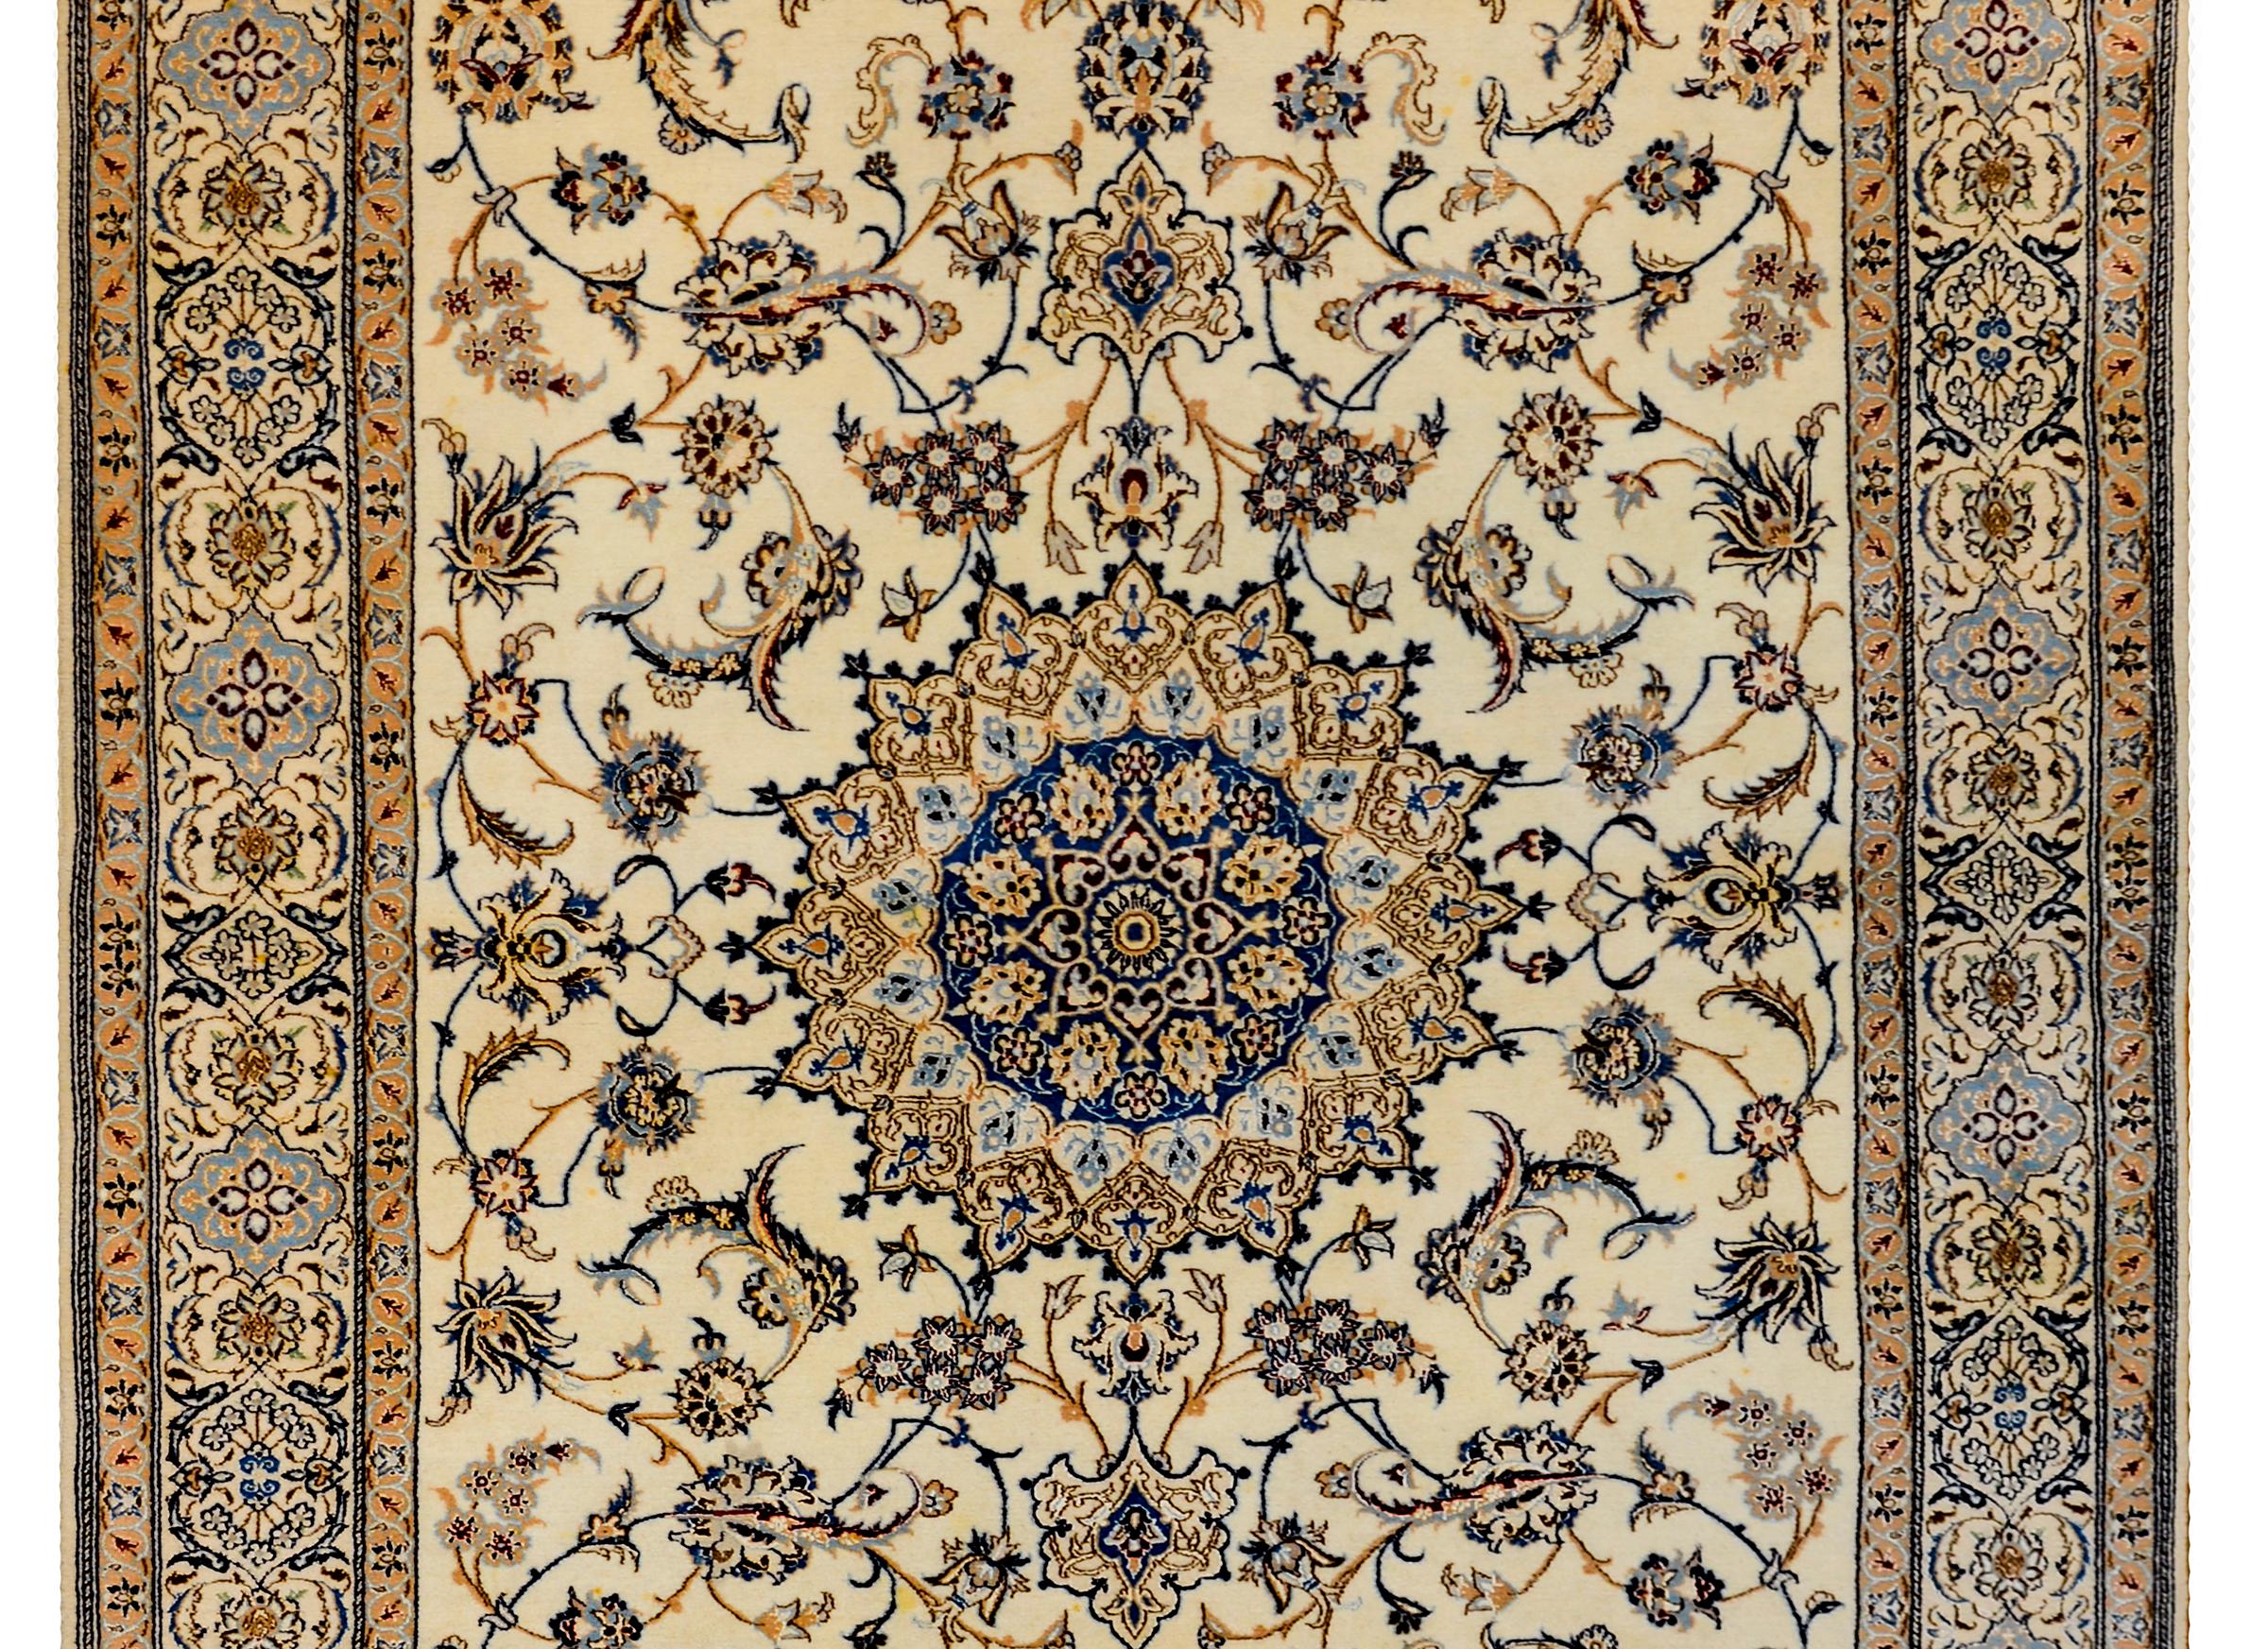 A mesmerizing late 20th century Persian Isfahan silk and wool rug with a large central circular medallion amidst a field of scrolling vines and large flowers and leaves, all woven in light and dark indigo, gold, and brown, on a cream colored ground.